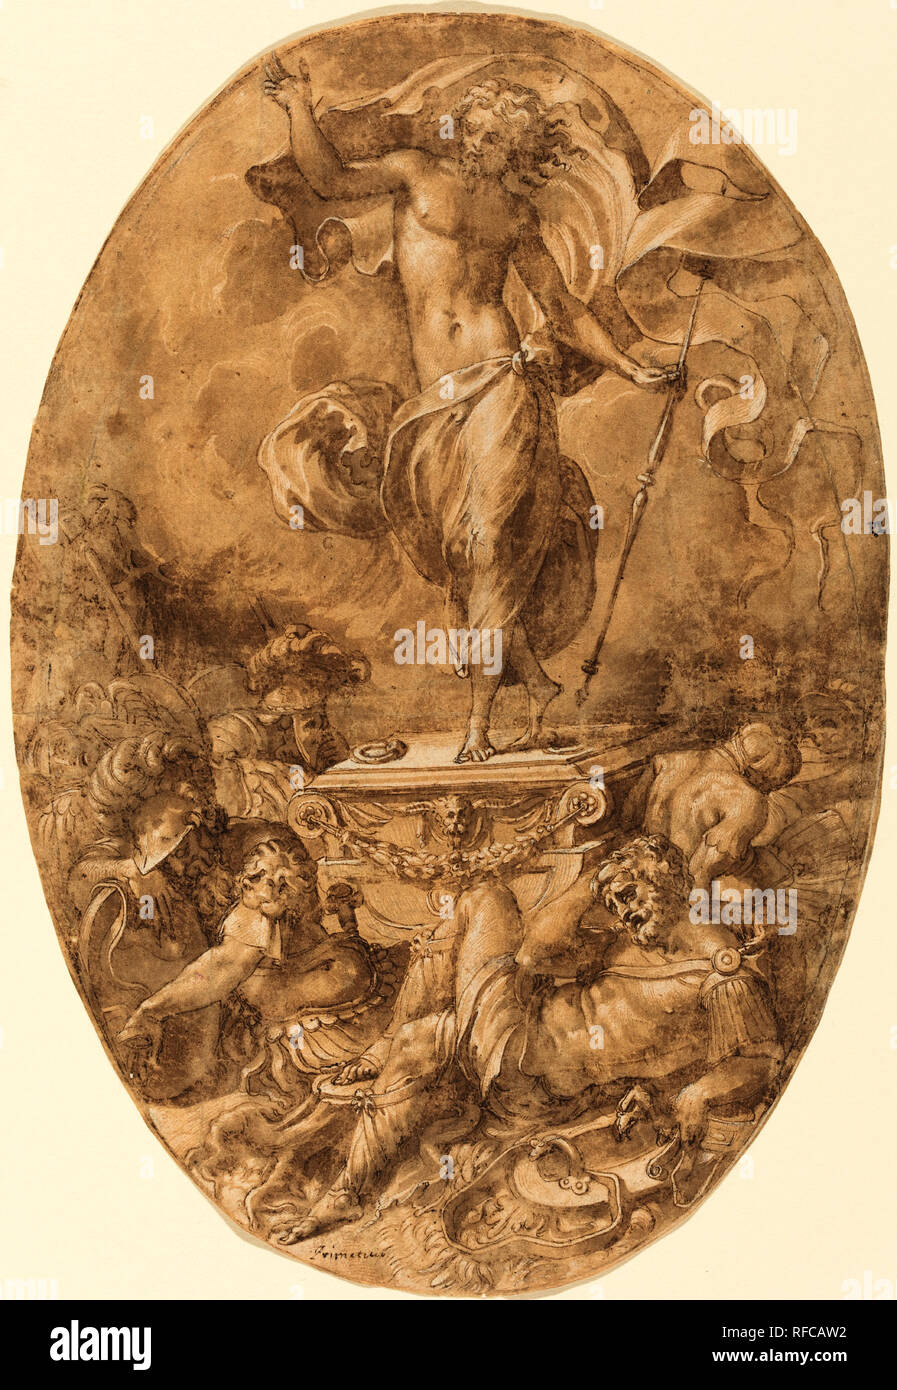 The Resurrection. Dated: 1545/1548. Dimensions: overall (oval): 28 x 19.1 cm (11 x 7 1/2 in.). Medium: 'pen and brown ink with brown wash heightened with white on laid paper (faint black chalk sketch on verso?). Museum: National Gallery of Art, Washington DC. Author: Francesco Salviati. Stock Photo